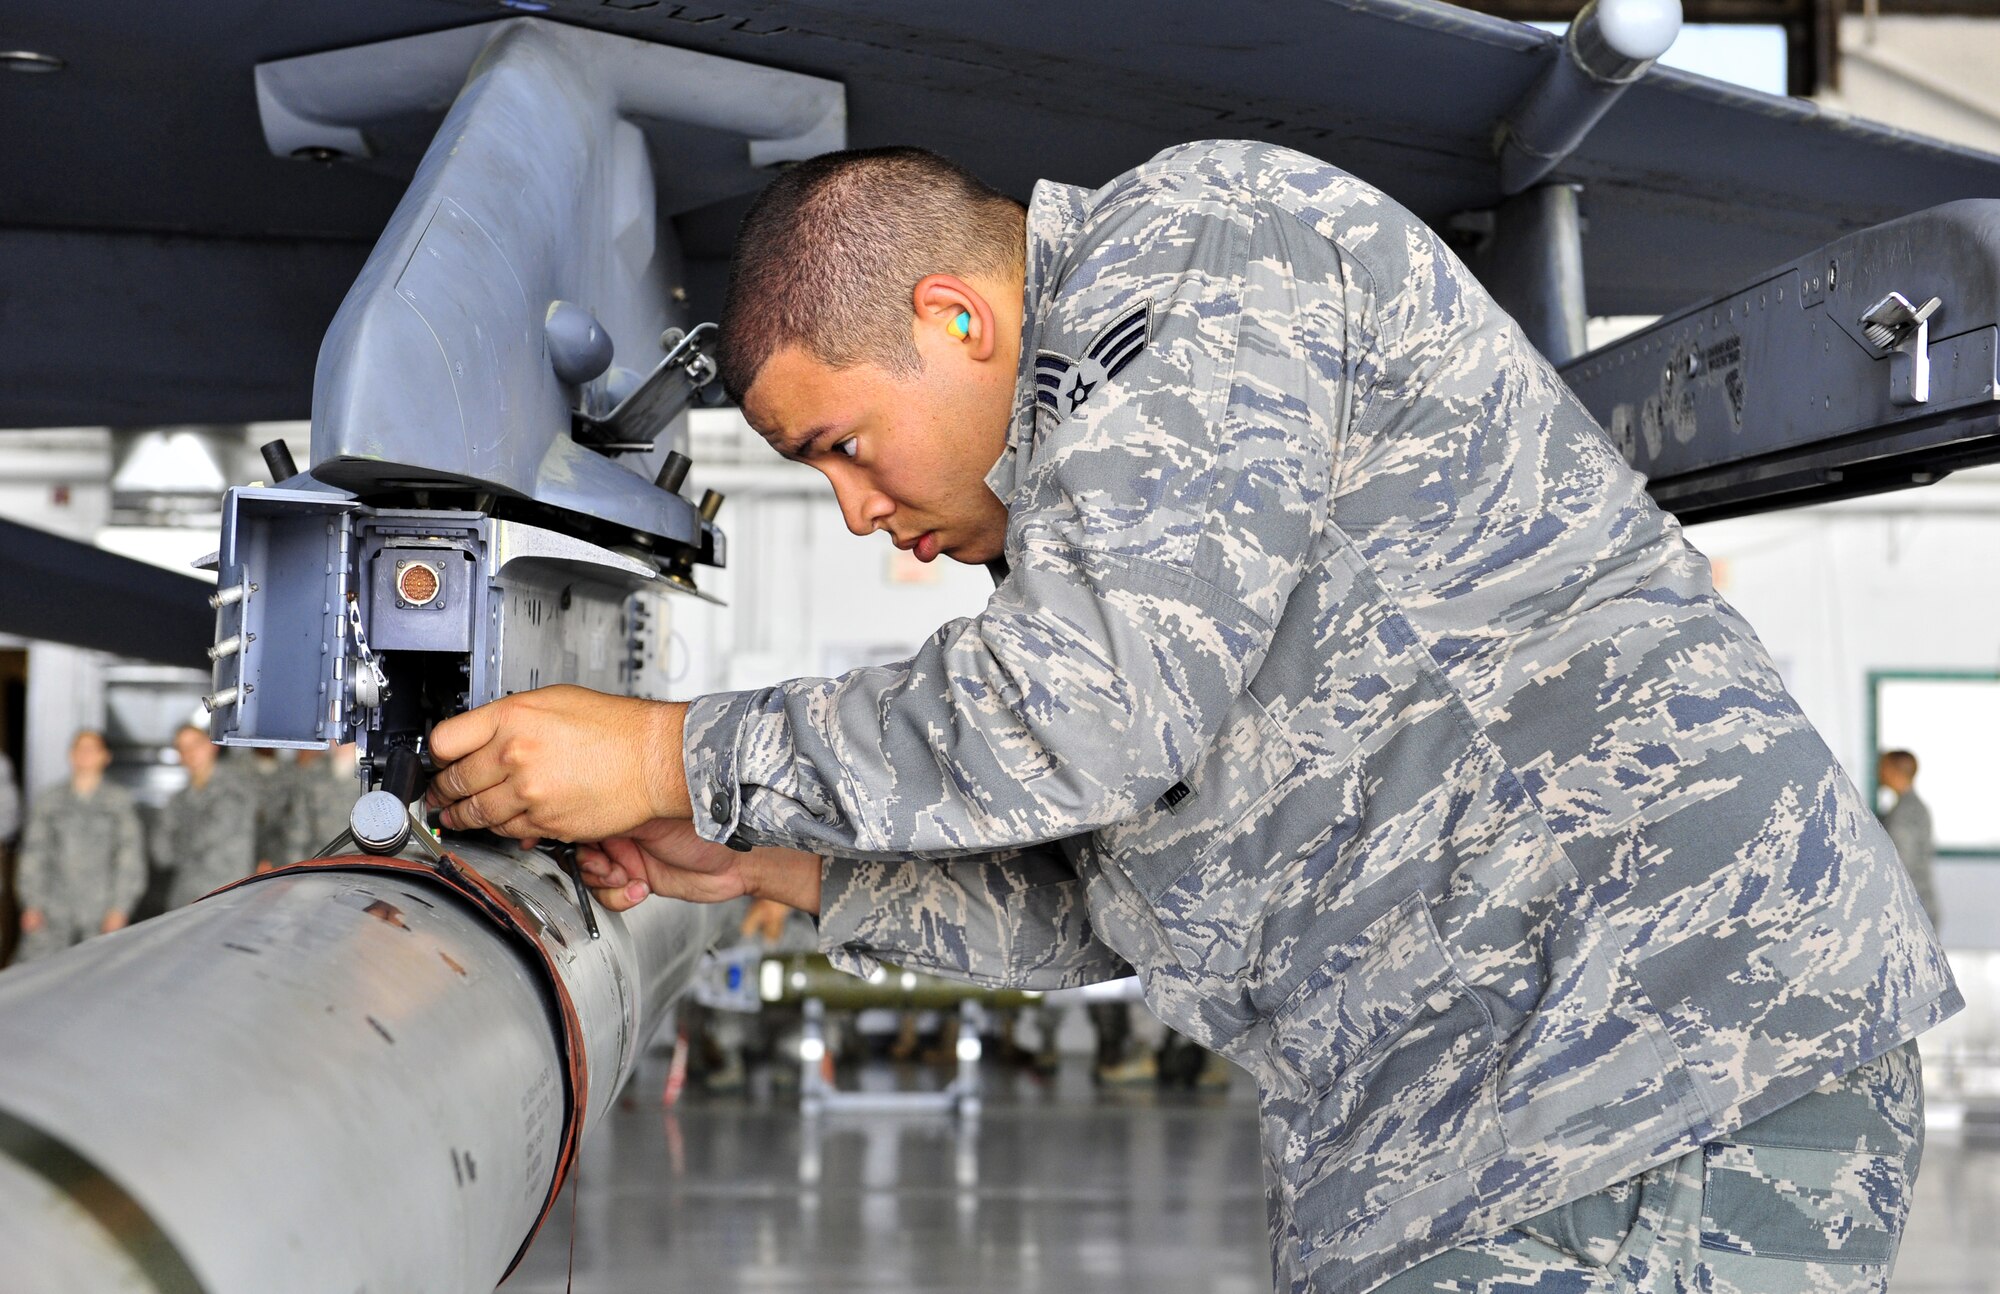 100416-F-8430J-088
SHAW AIR FORCE BASE, S.C. -Senior Airman Dartagnan Powell, 79th Aircraft Maintenance Unit, secures a missile on to the F-16 April 16, 2010. Wing weapons standardization held the first Weapons Load Crew of the Quarter Competition for 2010. The 55th and 79th Aircraft Maintenance Units Weapons load crews competed against each other in a race against time. Both load crews were tasked to load two air intercept missiles (AIM - 120) and two air-to-ground missiles (AGM - 88) within 45 minutes.  (U.S. Air Force photo/Airman 1st Class Amber E. N. Jacobs)
